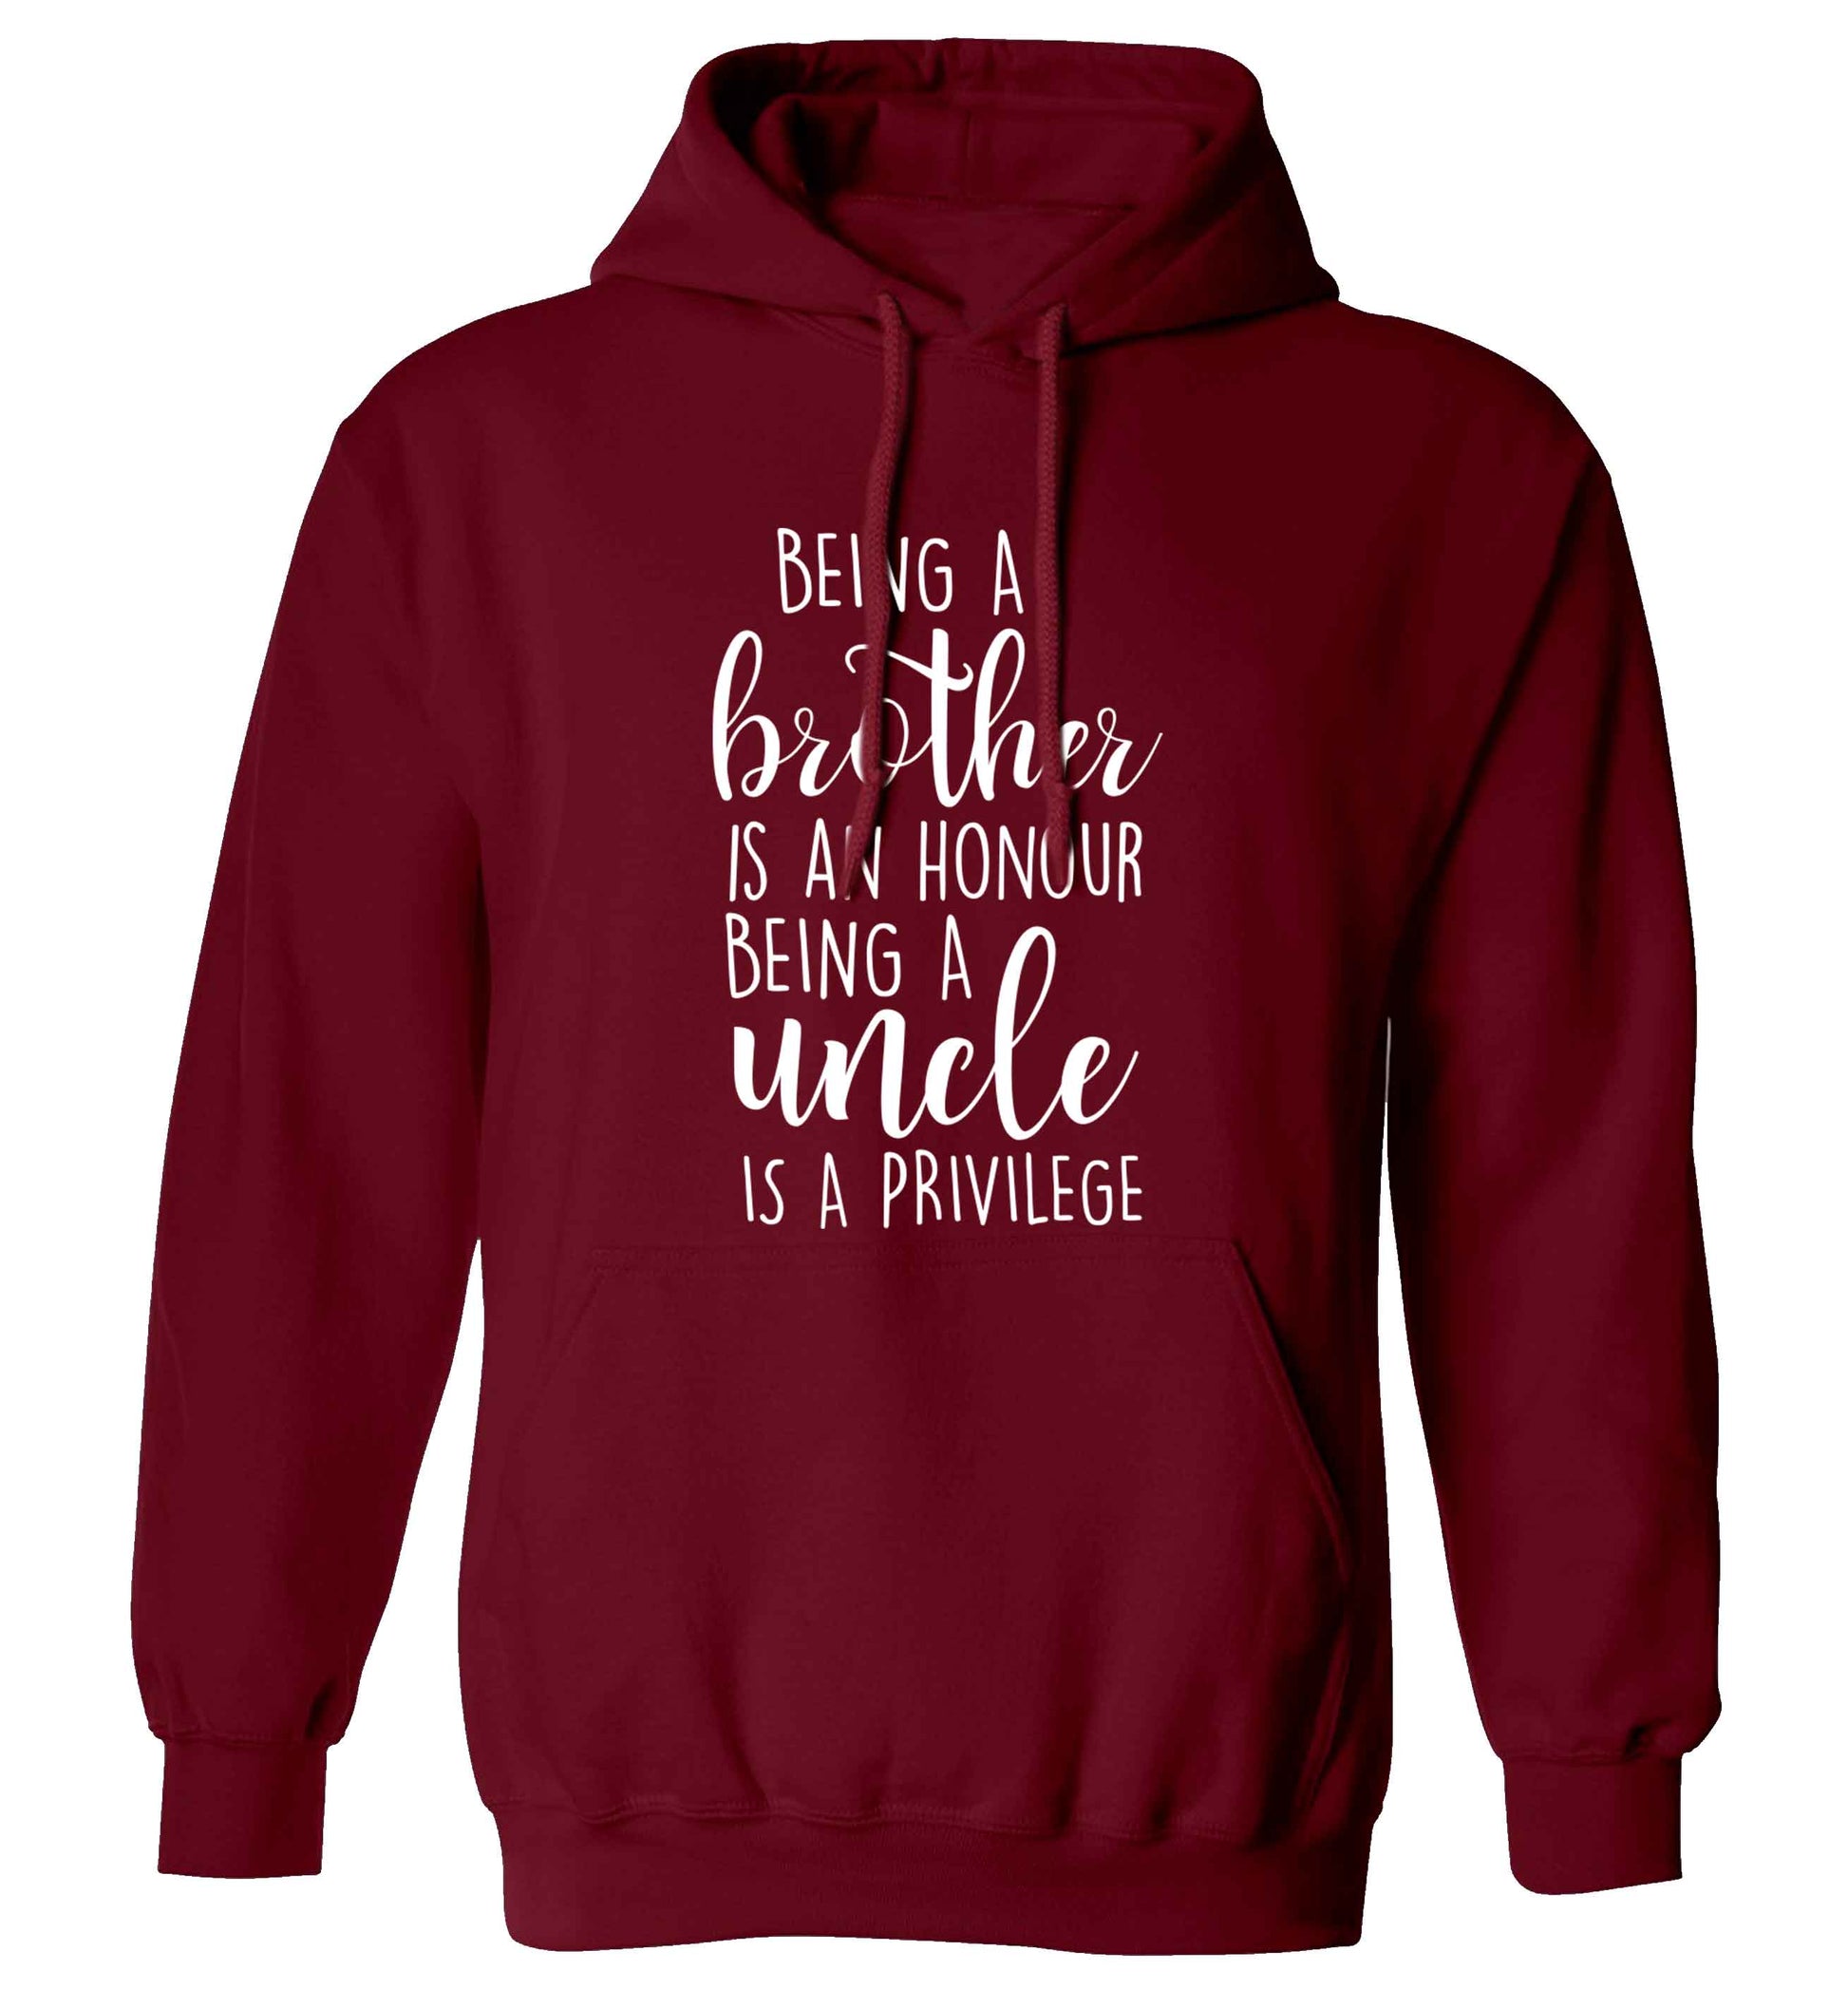 Being a brother is an honour being an uncle is a privilege adults unisex maroon hoodie 2XL